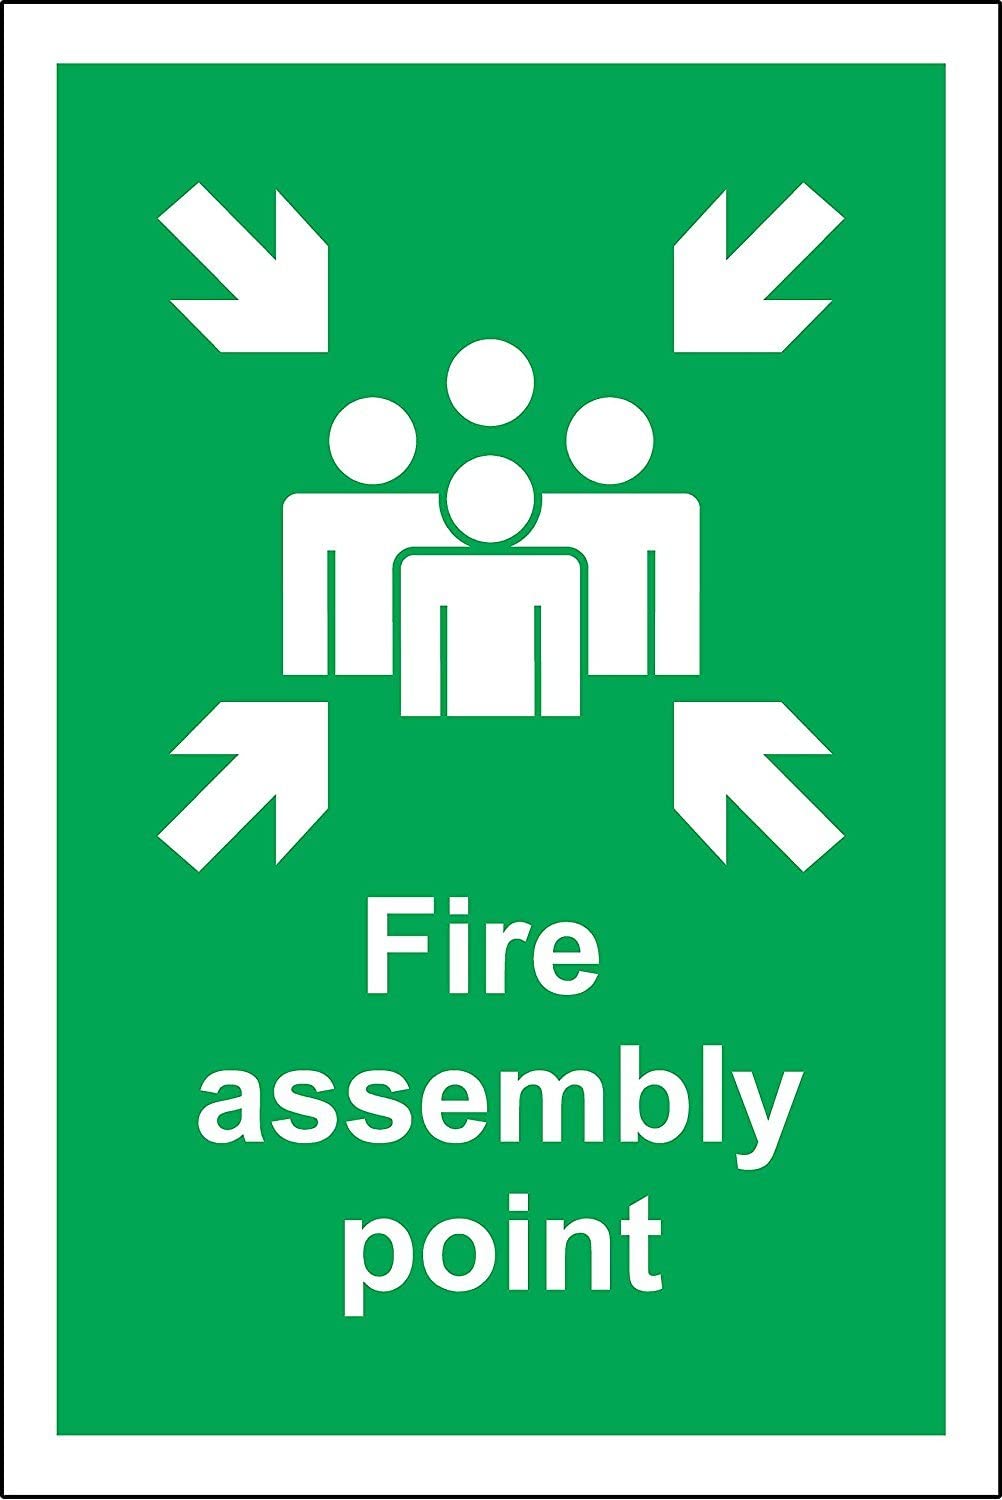 Why Is Fire Assembly Point Important